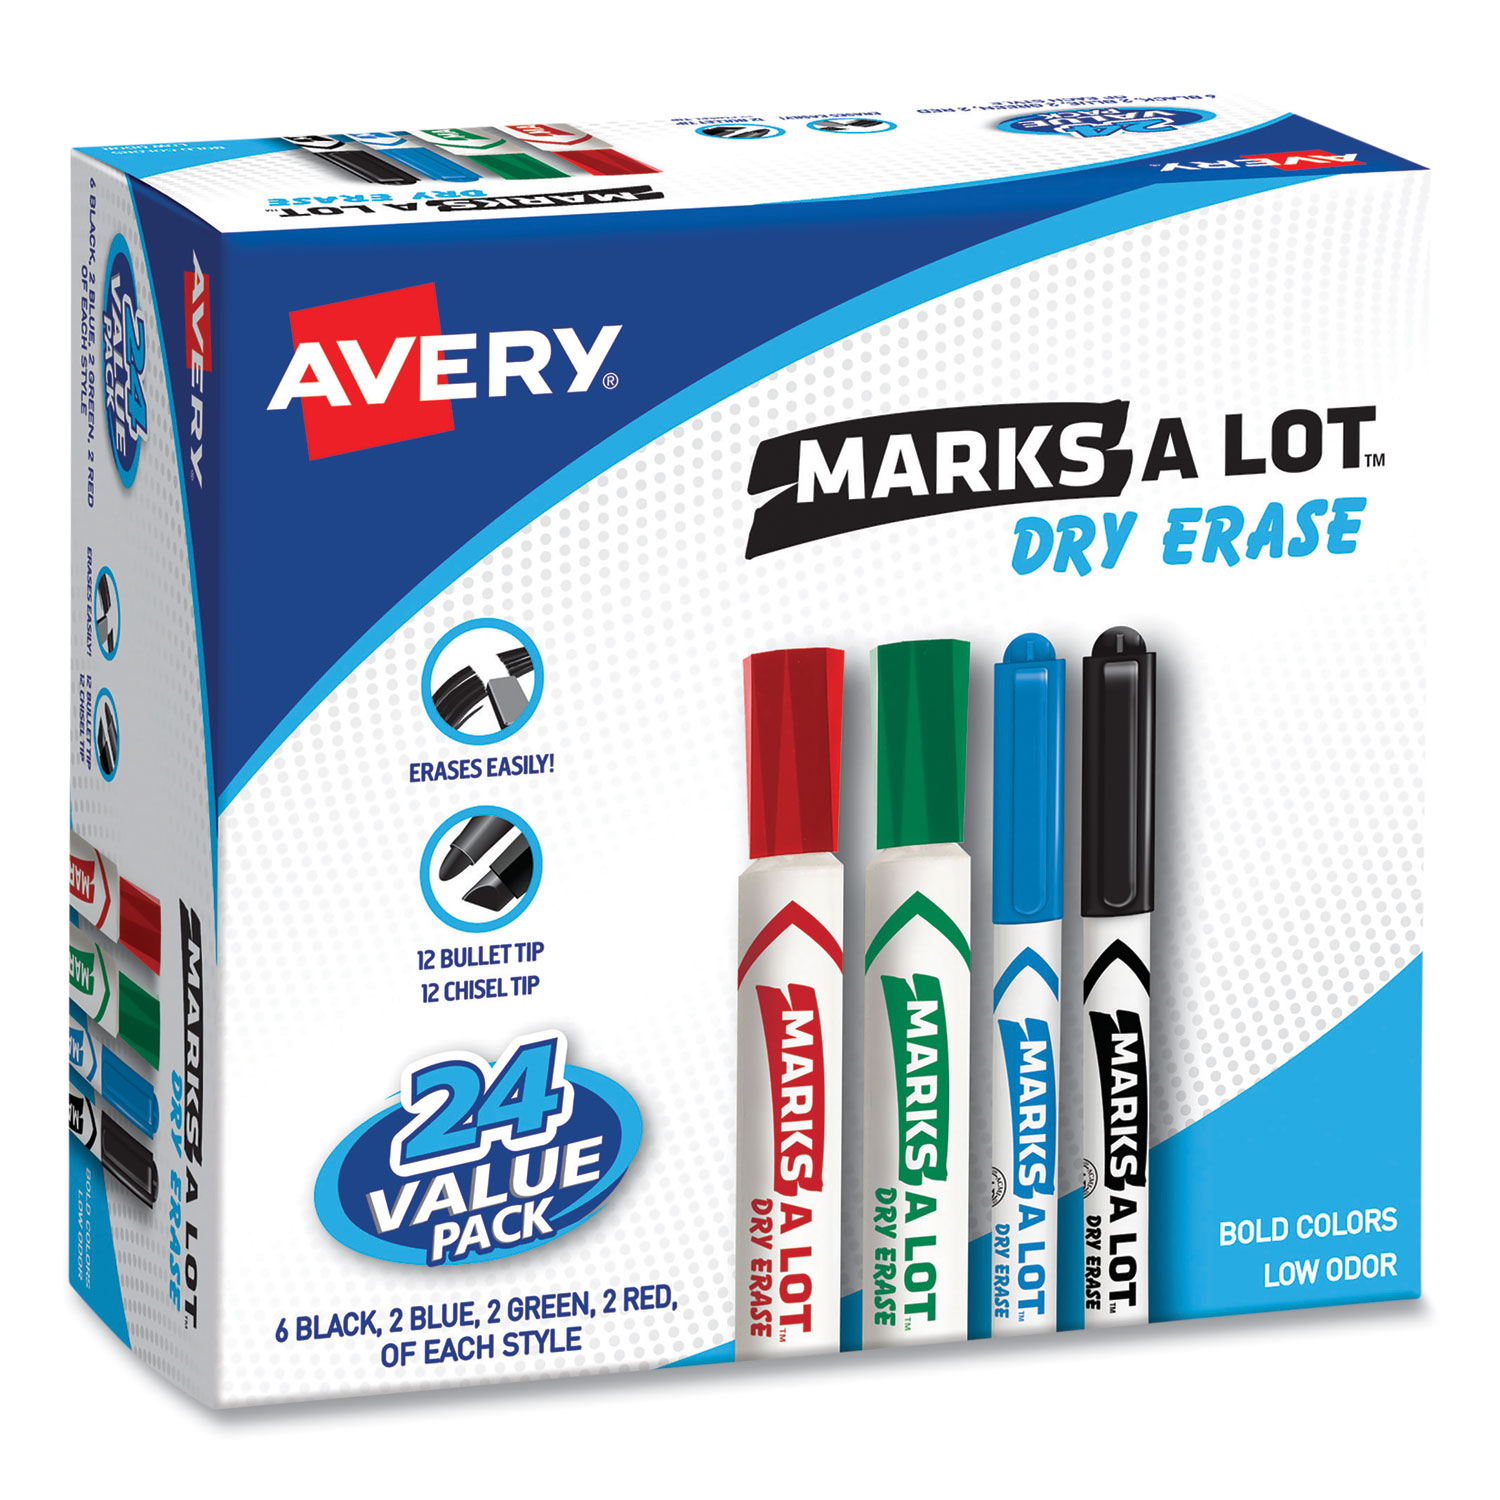 Avery Marks-A-Lot Permanent Markers, Ultra Fine Tip, red,blue,blue 6 pack